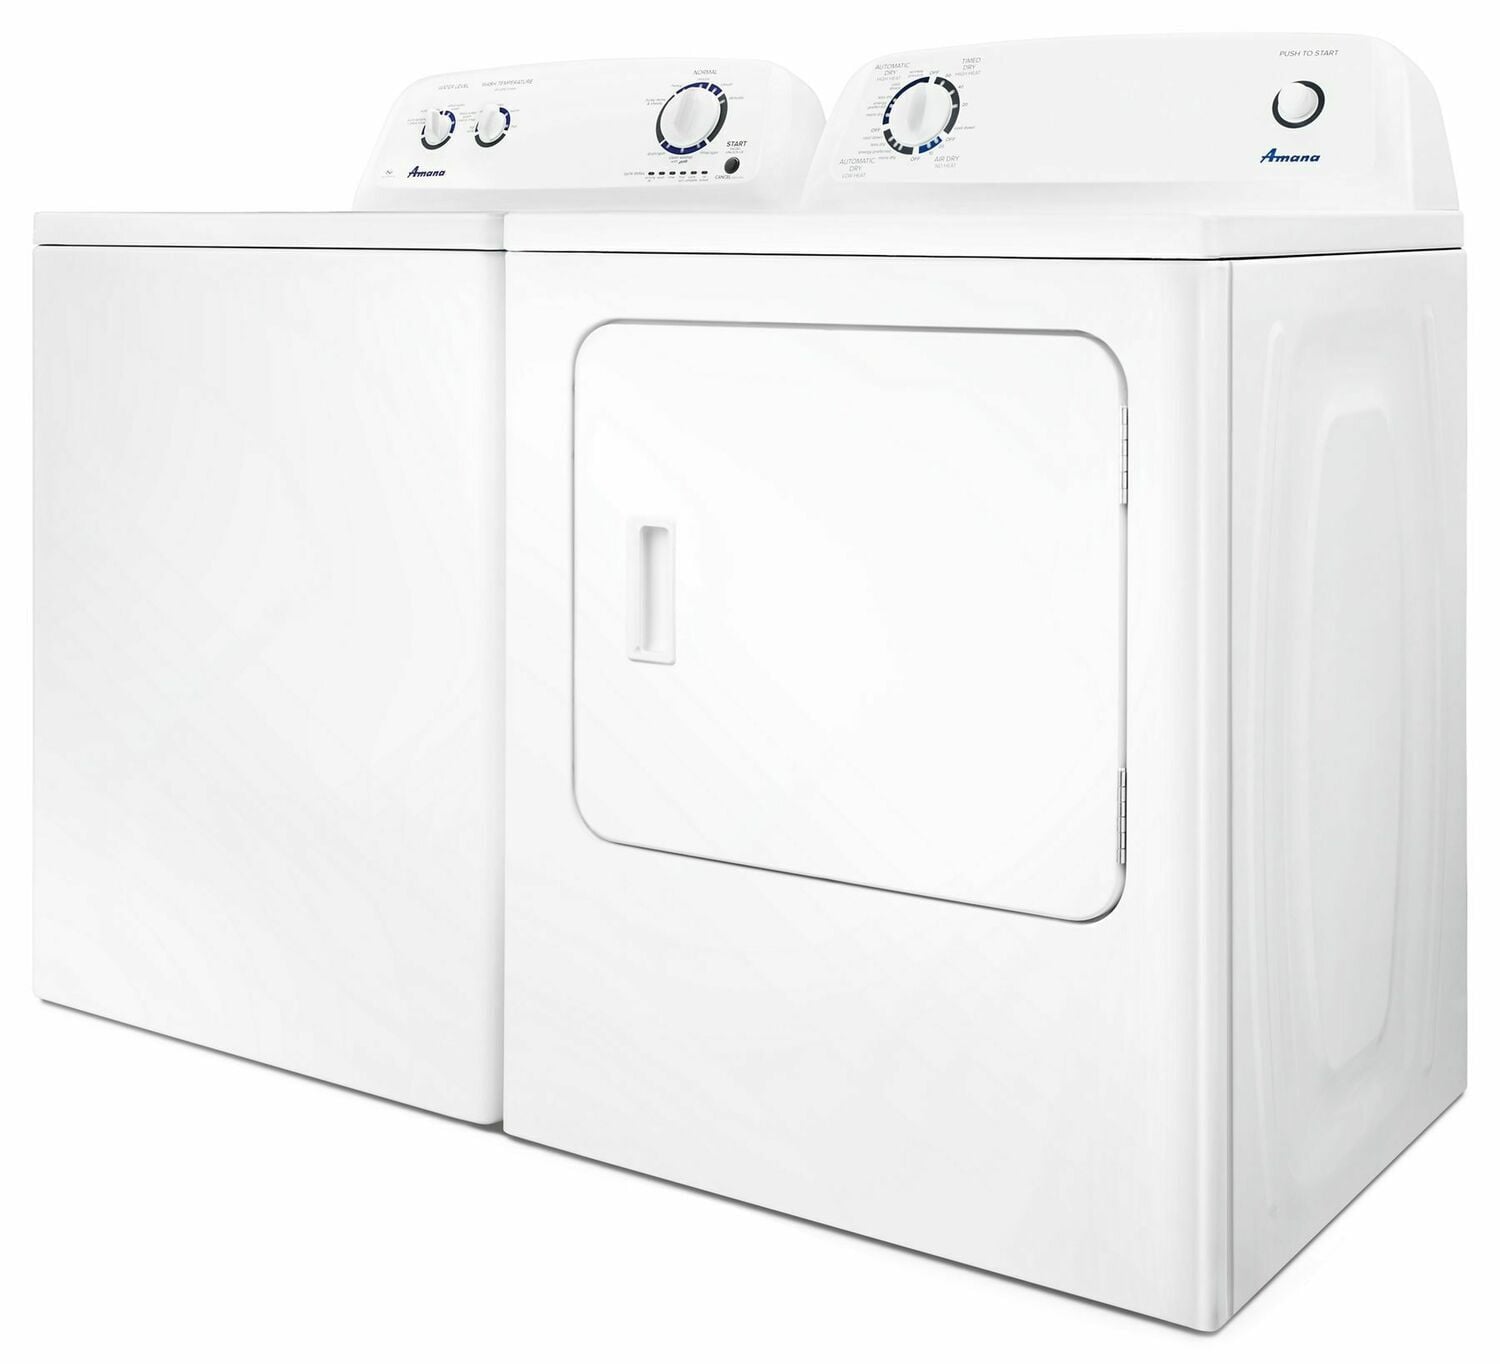 Amana NED4655EW 6.5 Cu. Ft. Electric Dryer With Wrinkle Prevent Option - White